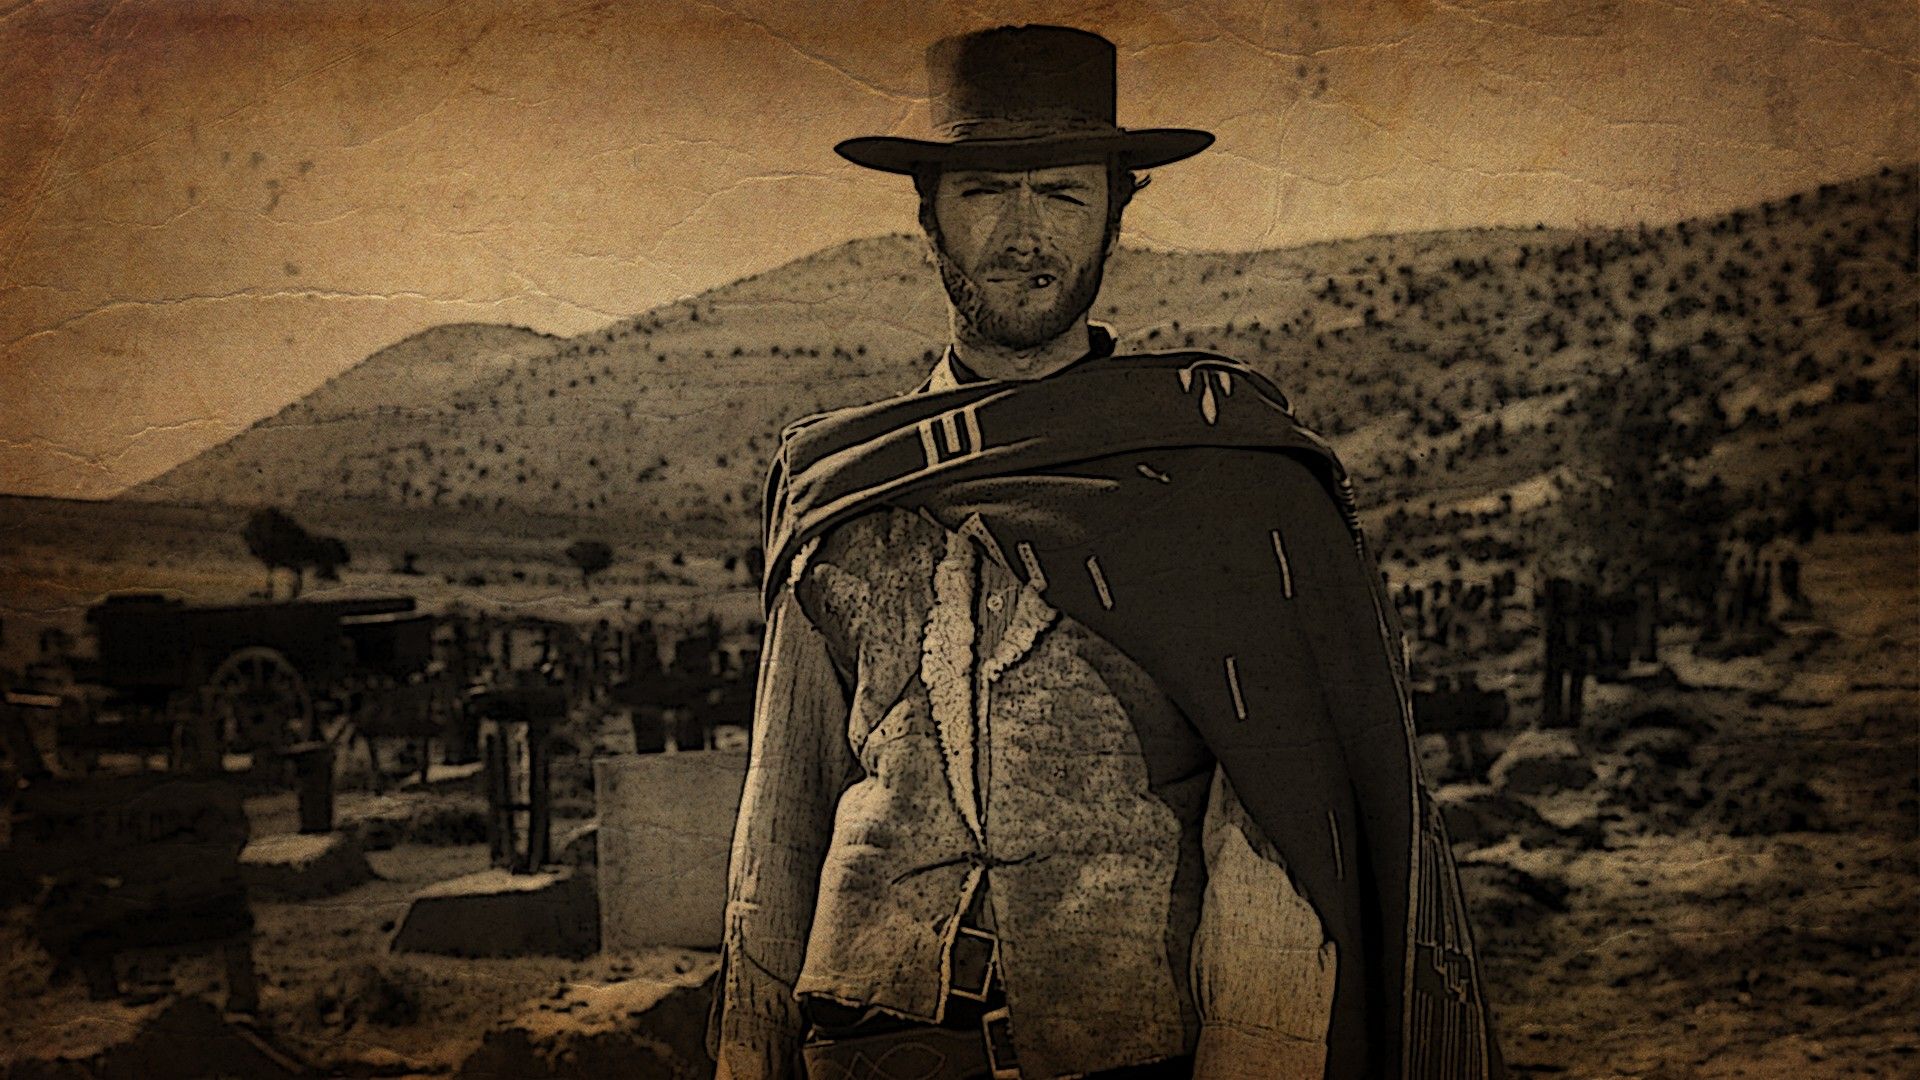 Clint Eastwood Western Sepia Cowboys Movies Wallpaper:1920x1080